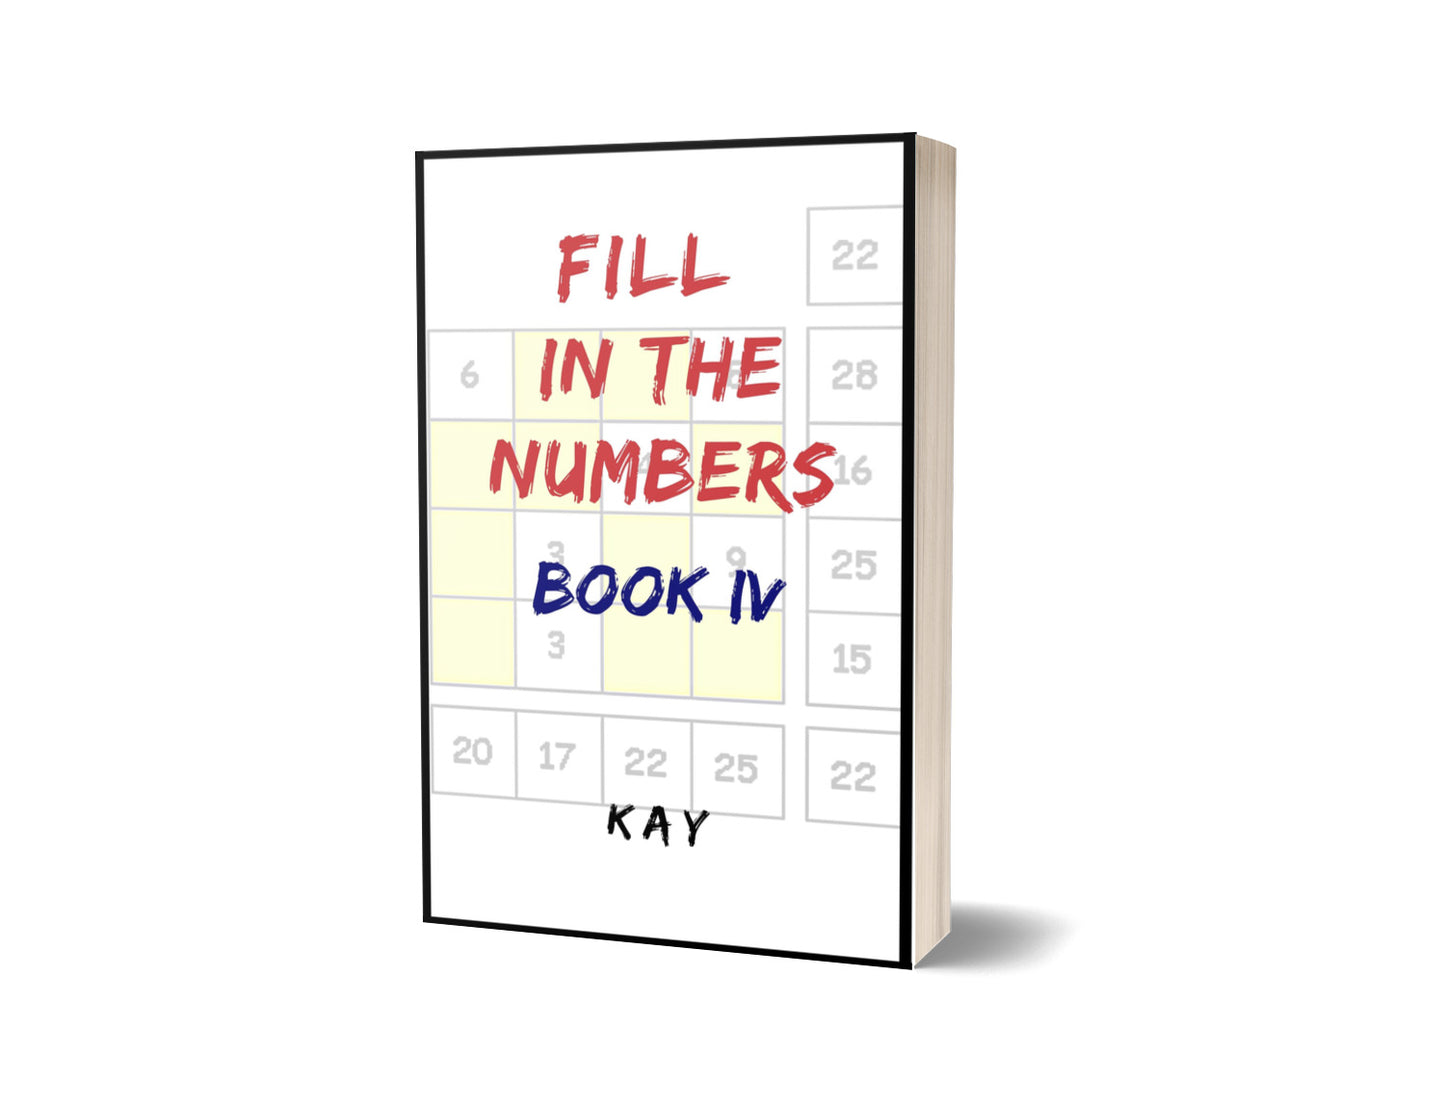 Fill in the Numbers Book IV